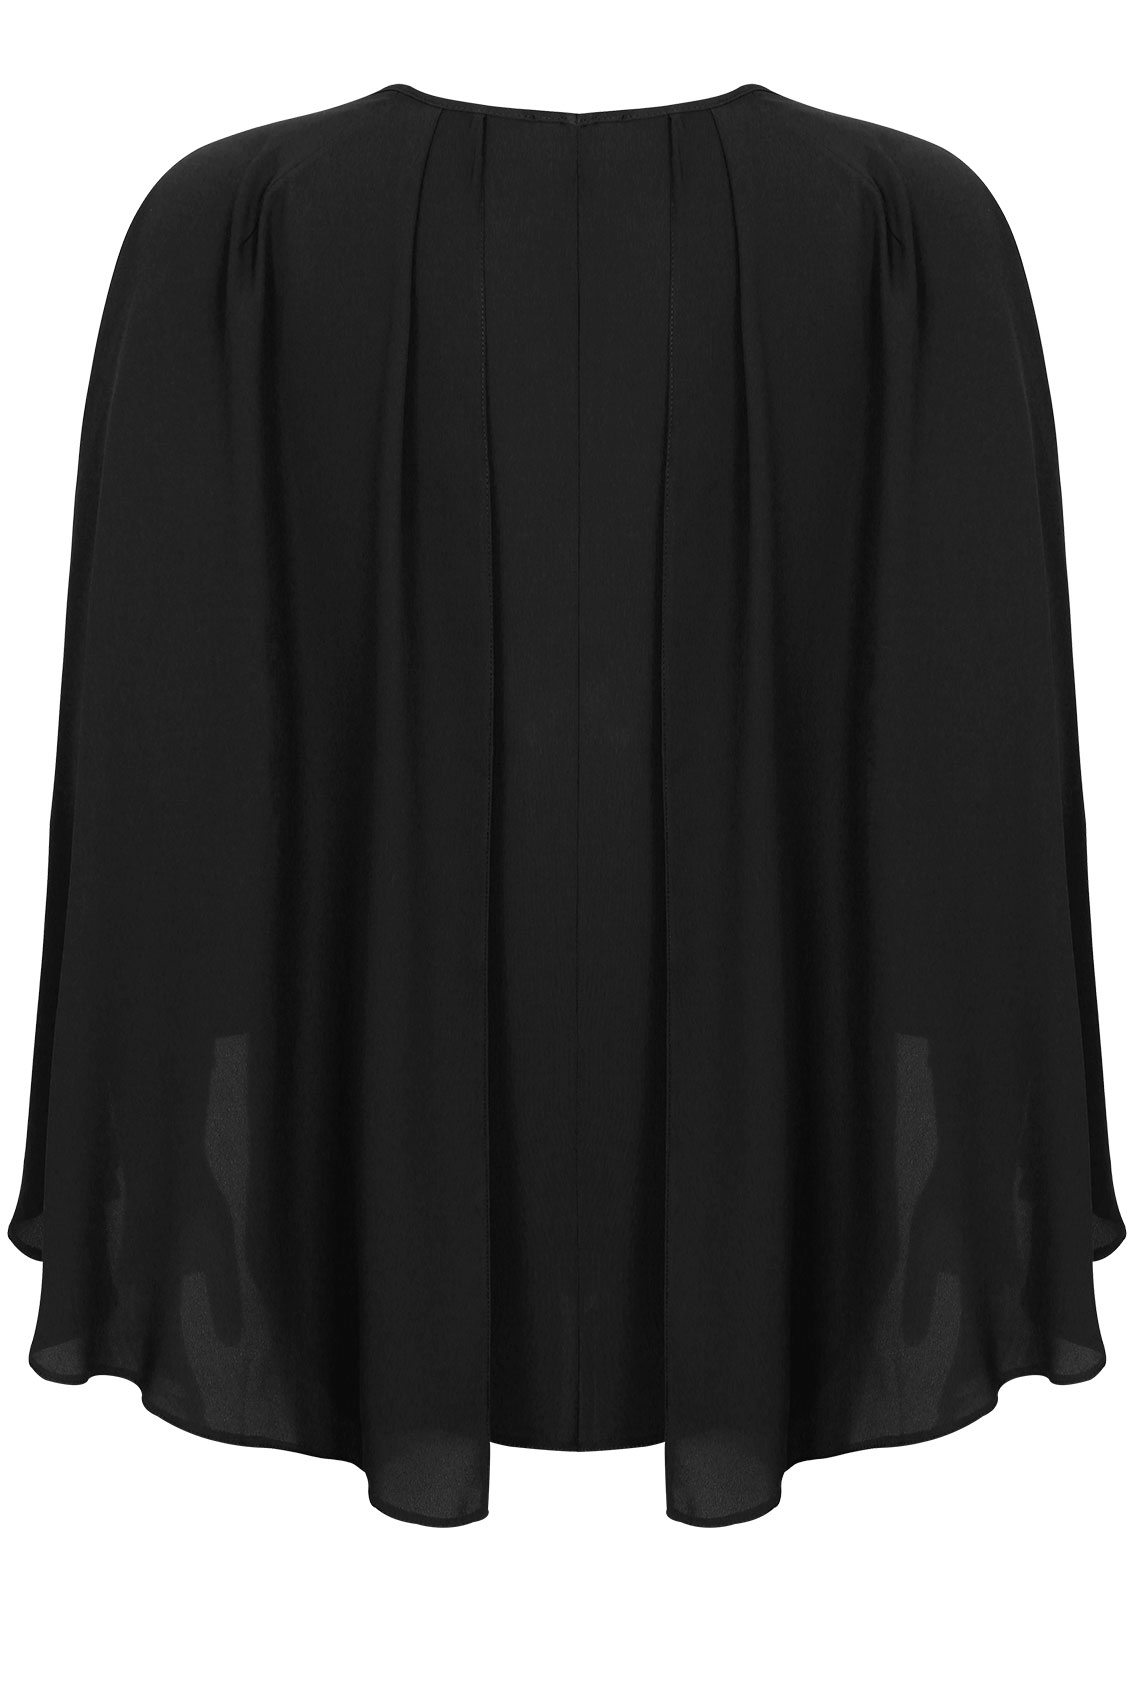 black-woven-sleeveless-top-with-v-neck-cape-detail-plus-size-16-to-32